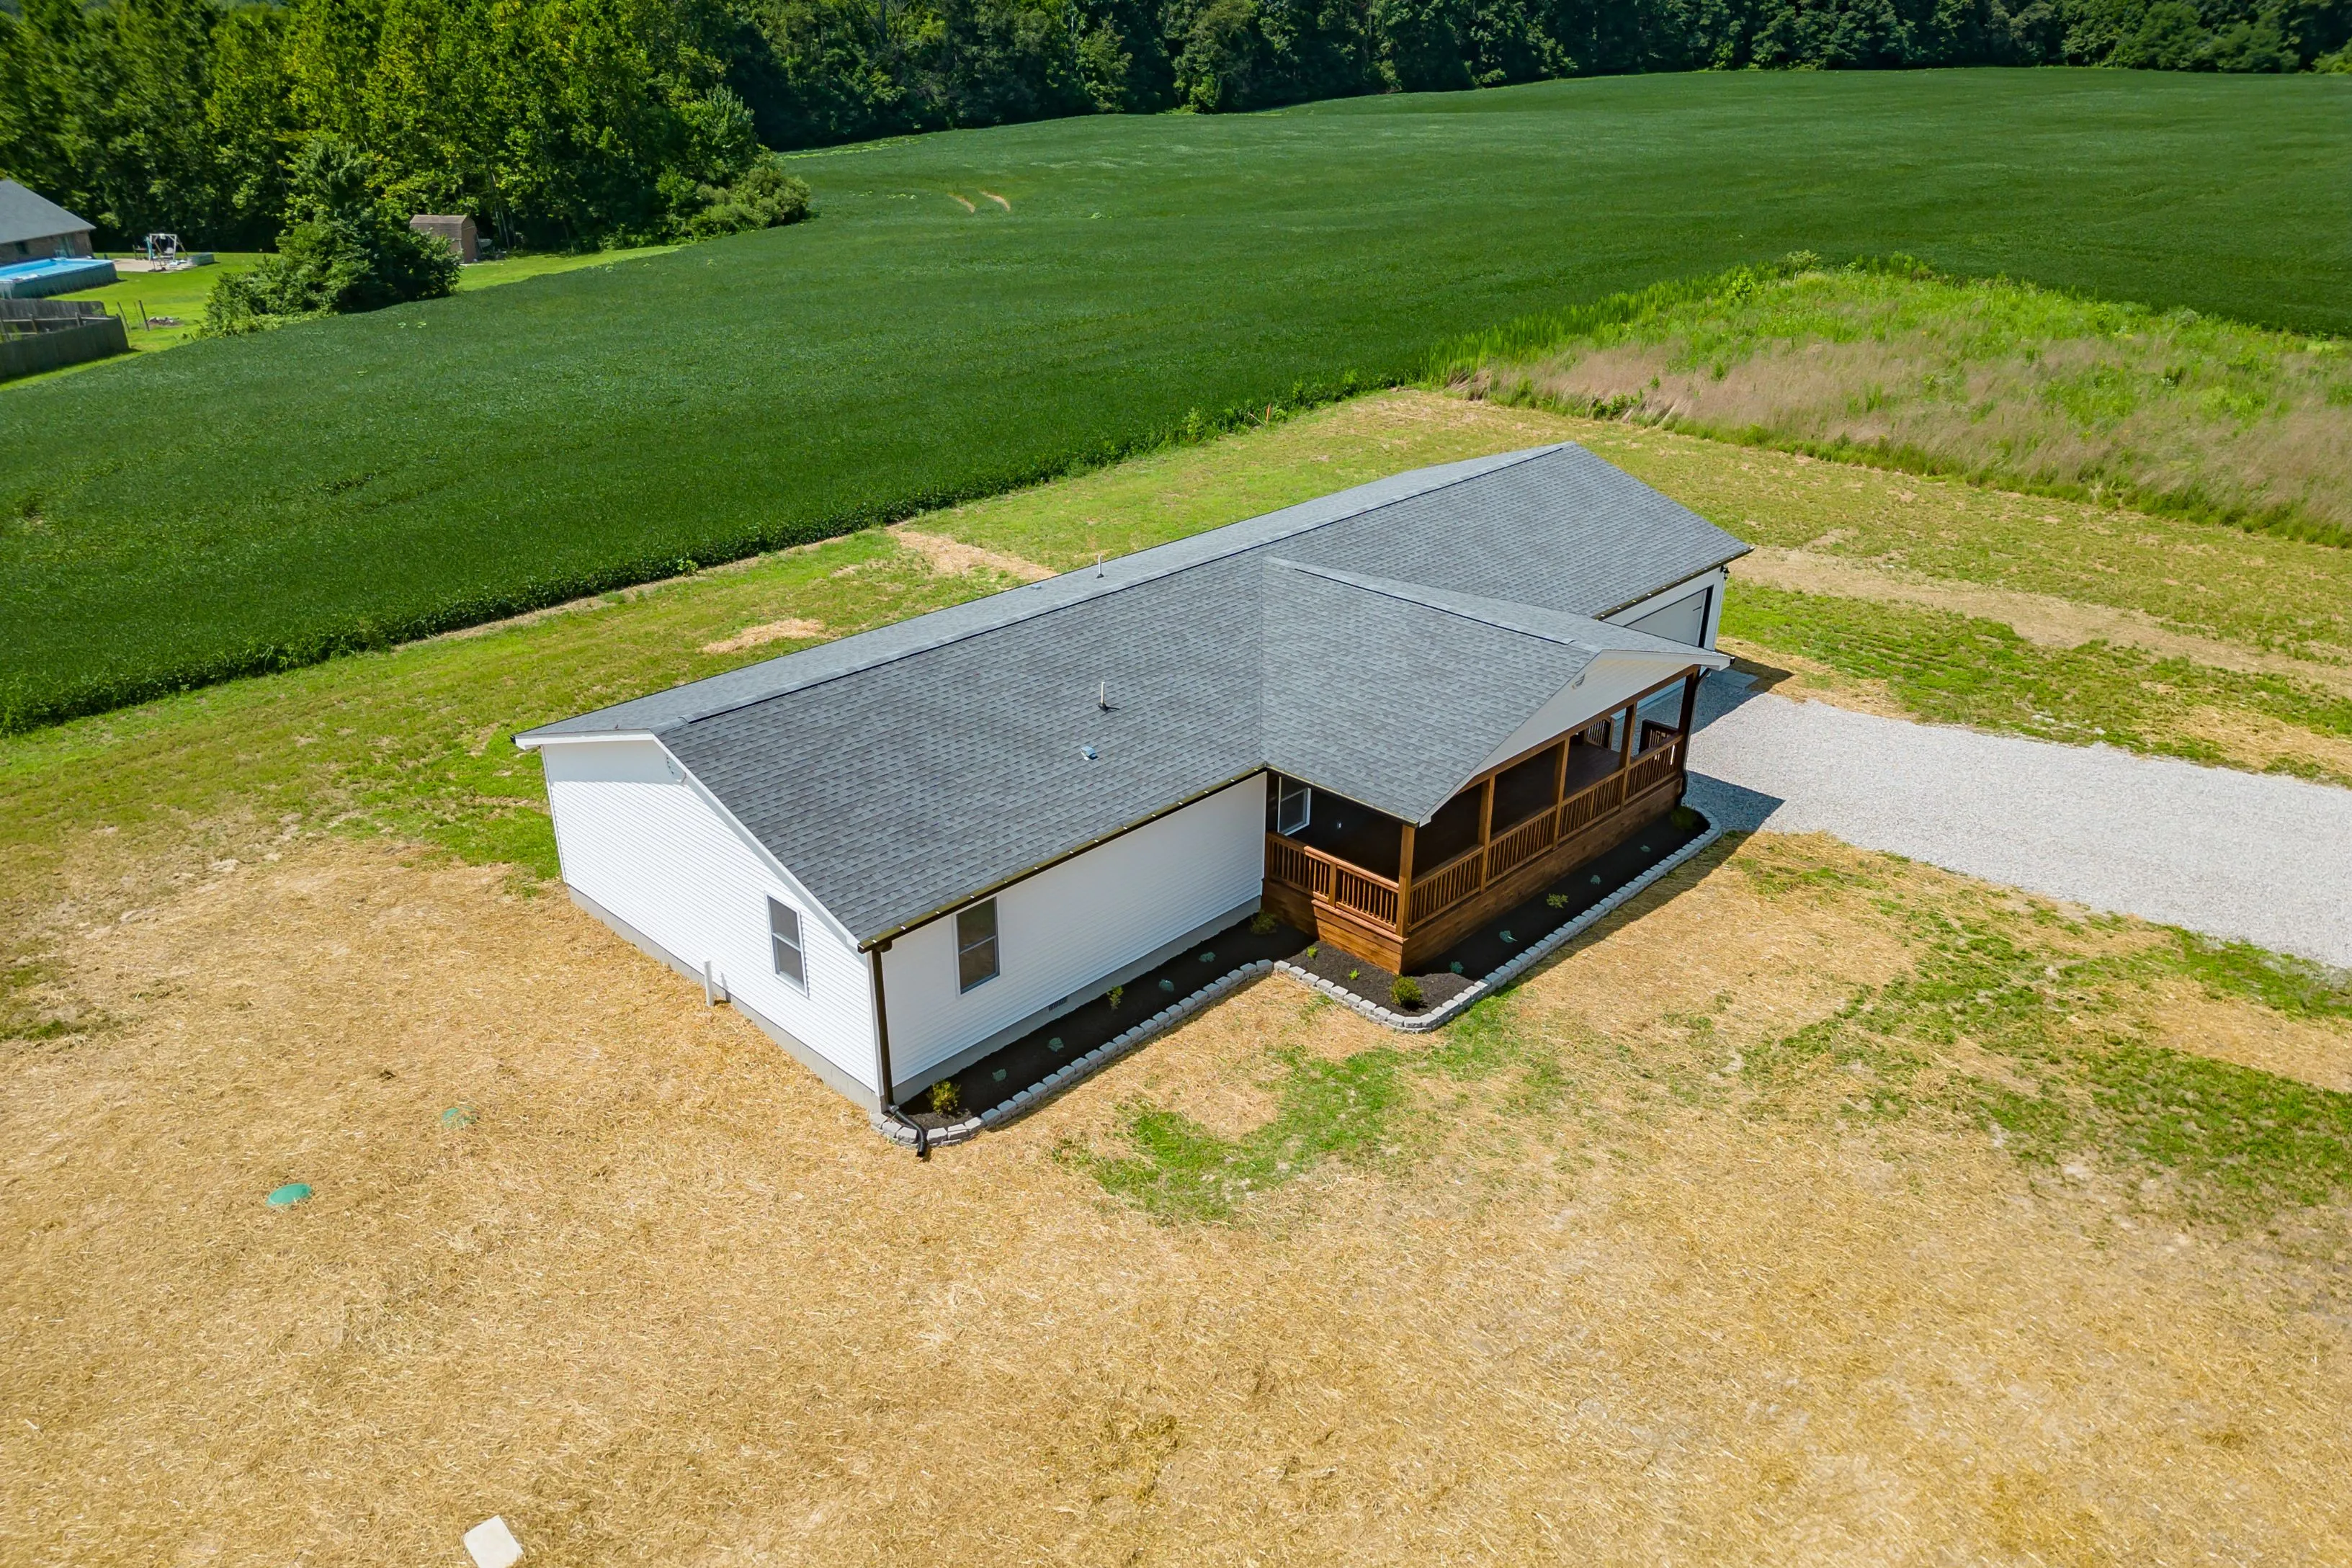 Aerial view of a modern single-story house with white siding and a dark roof, featuring a wooden porch, surrounded by a large grassy field and a gravel driveway.